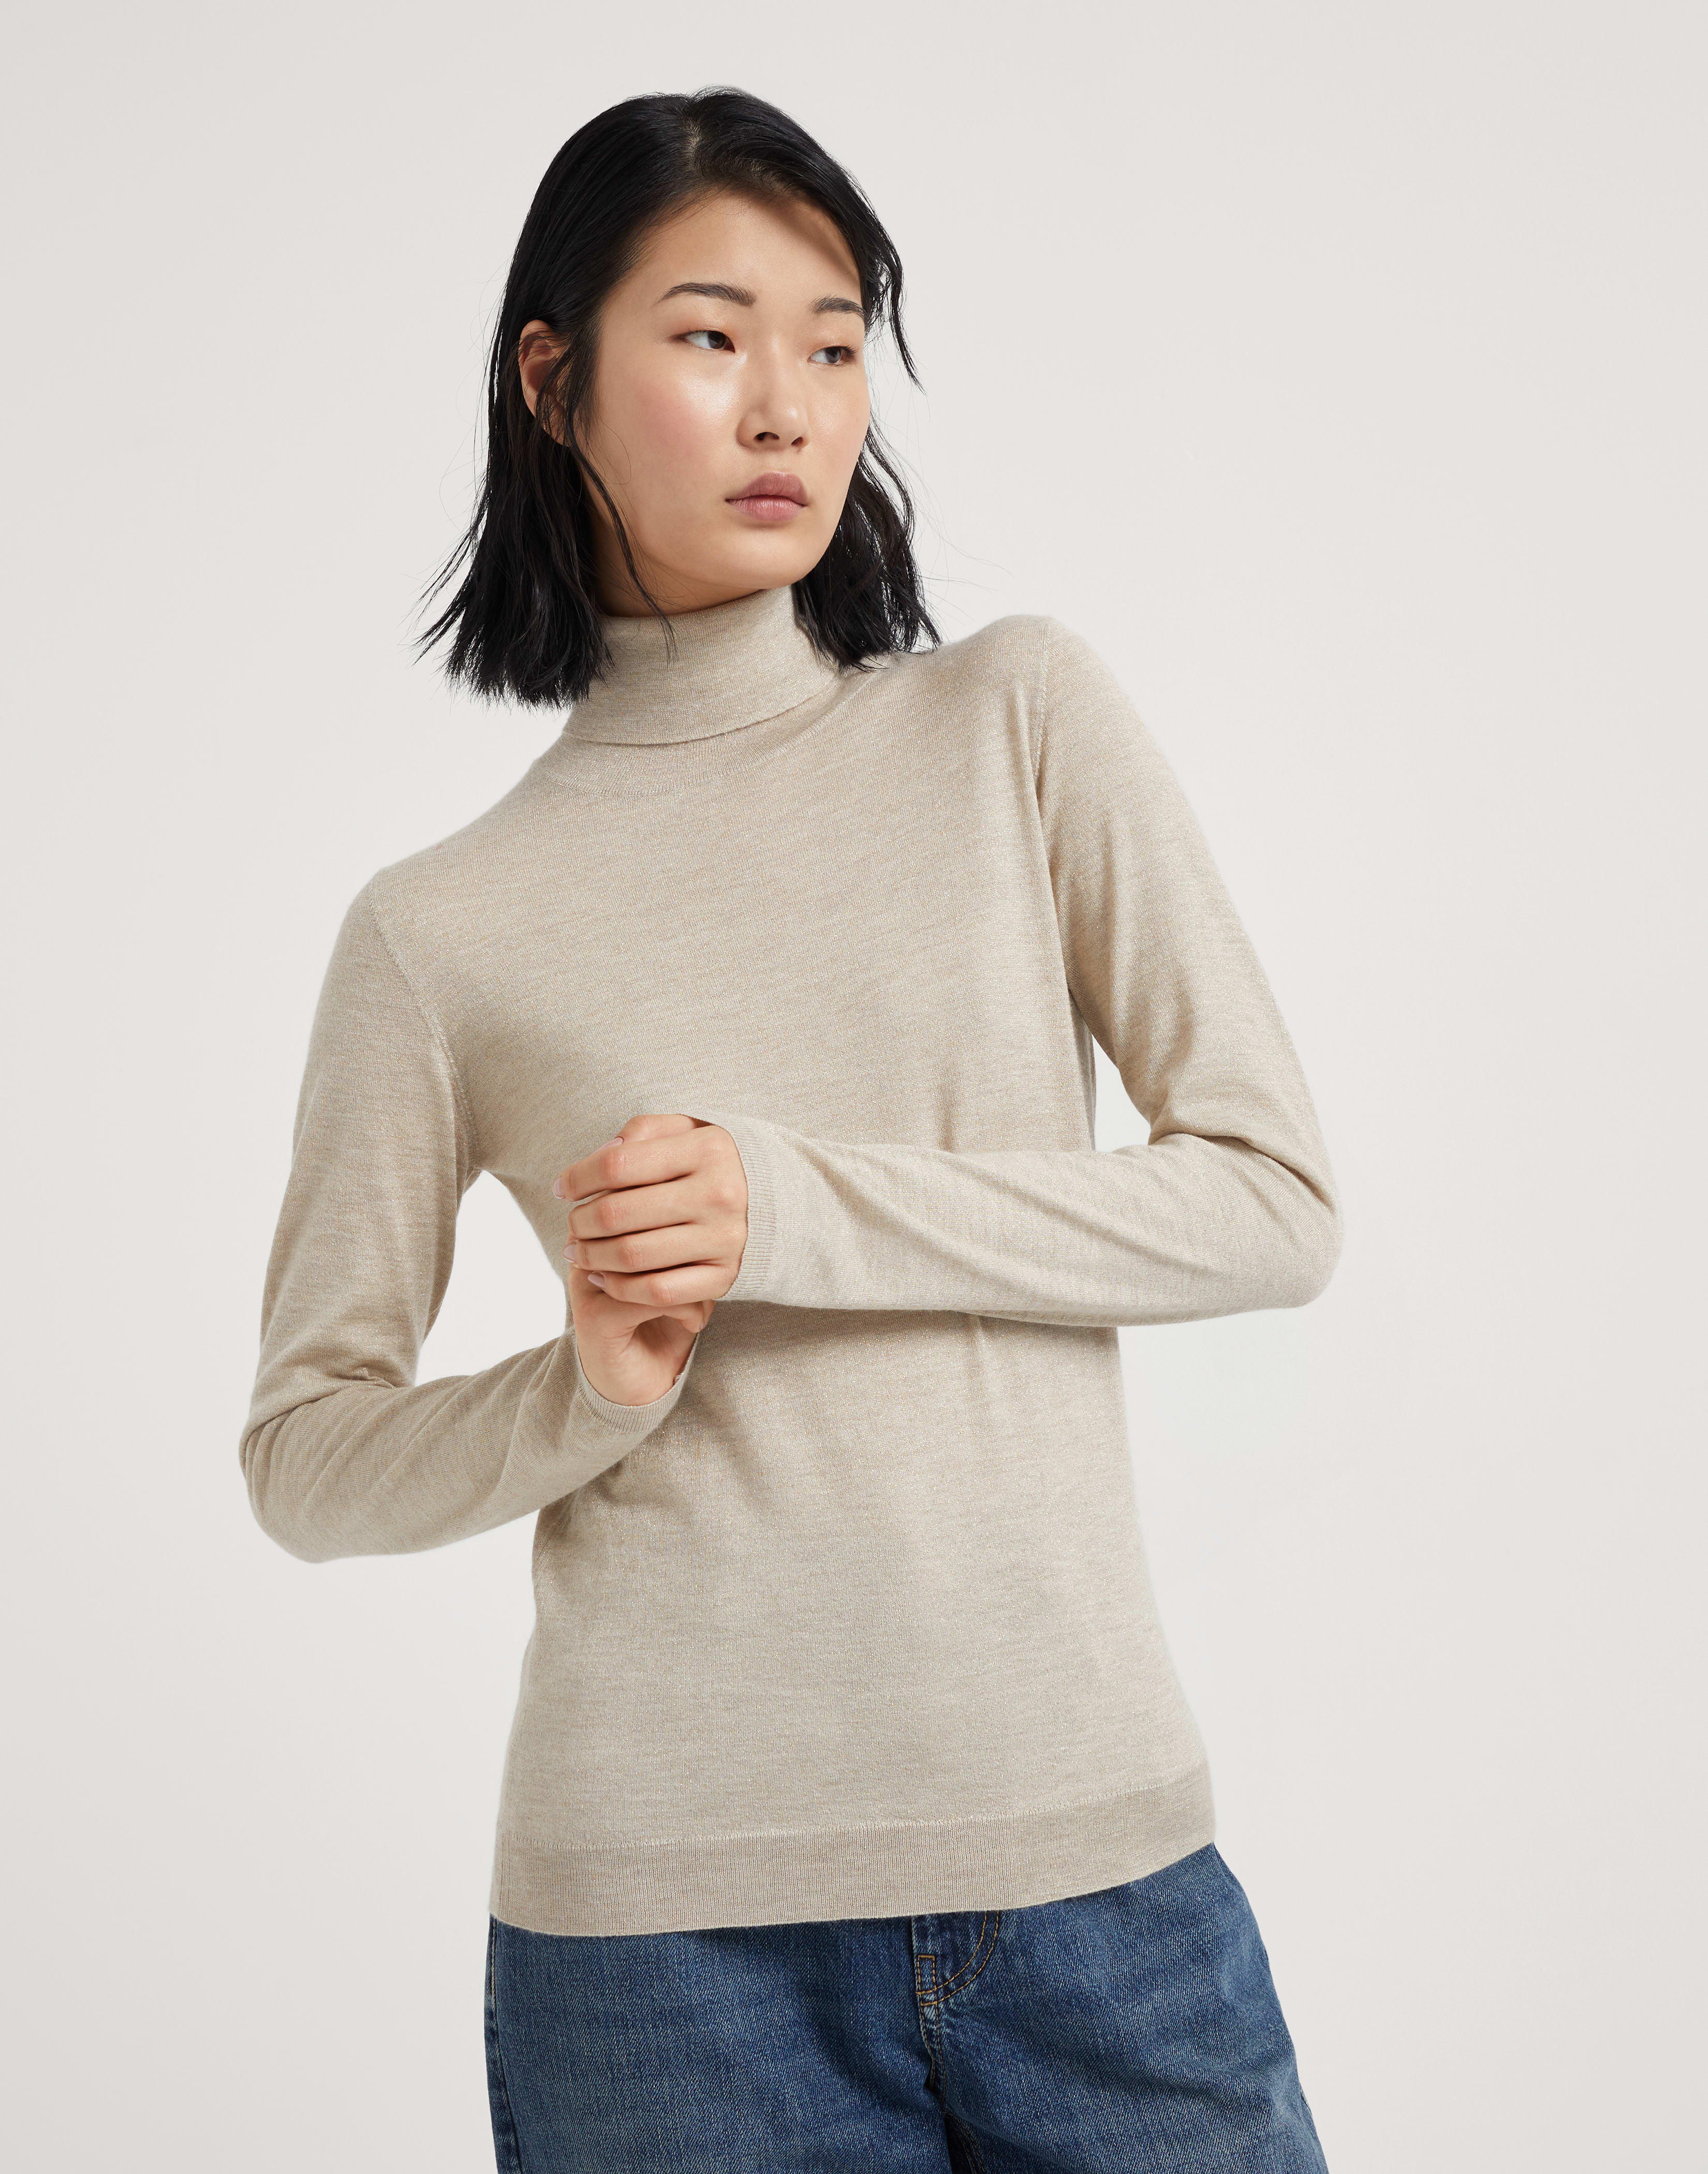 Turtleneck - Front view